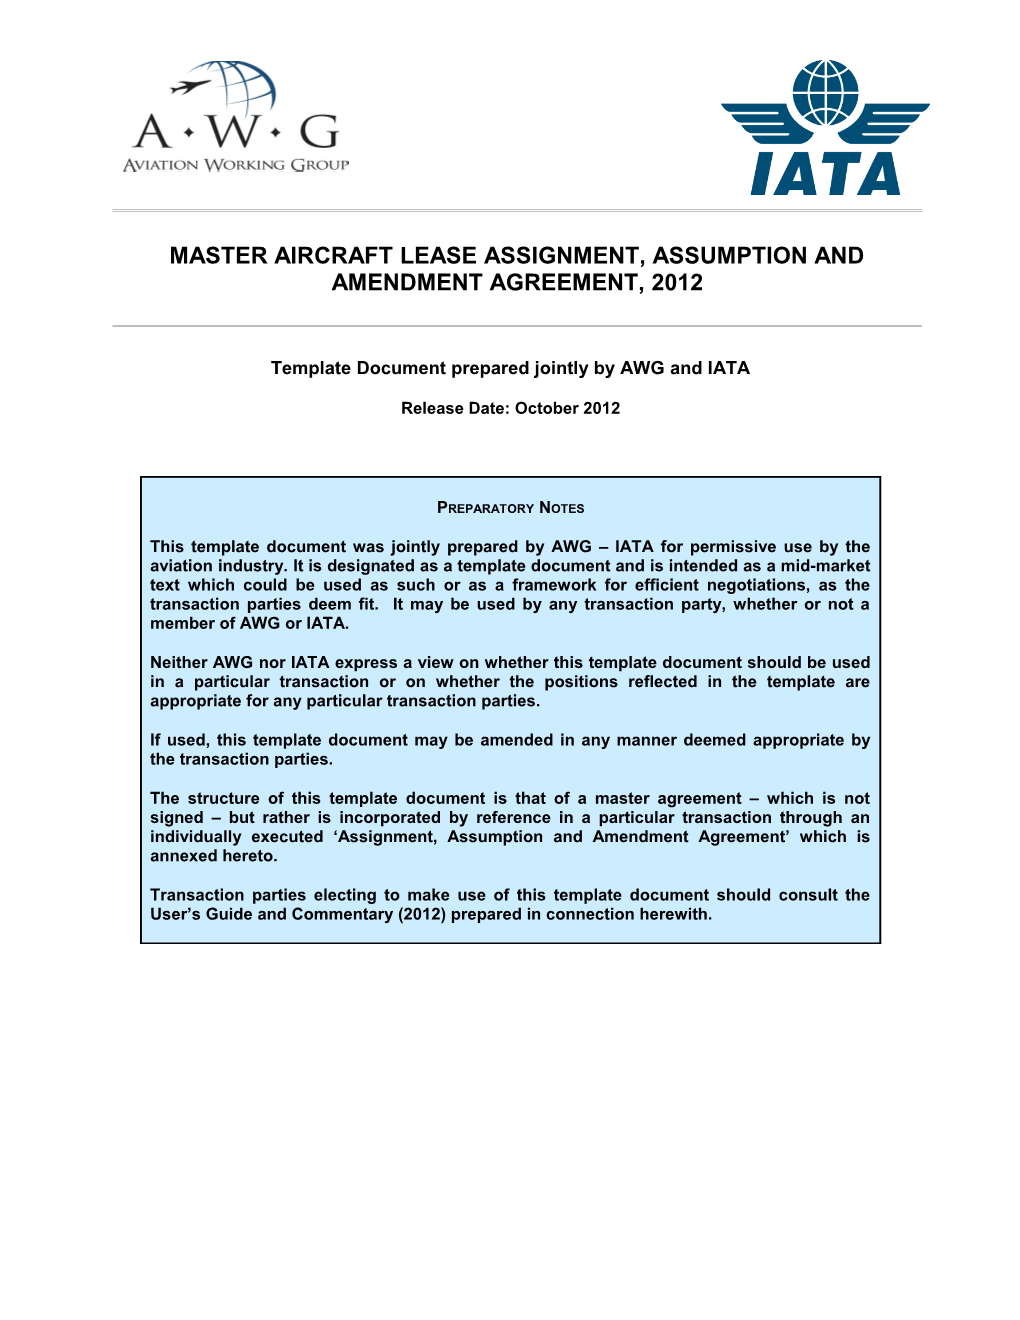 Ny-Master-Aircraft-Lease-Assignment-Assumption-And-Amendment-Agreement